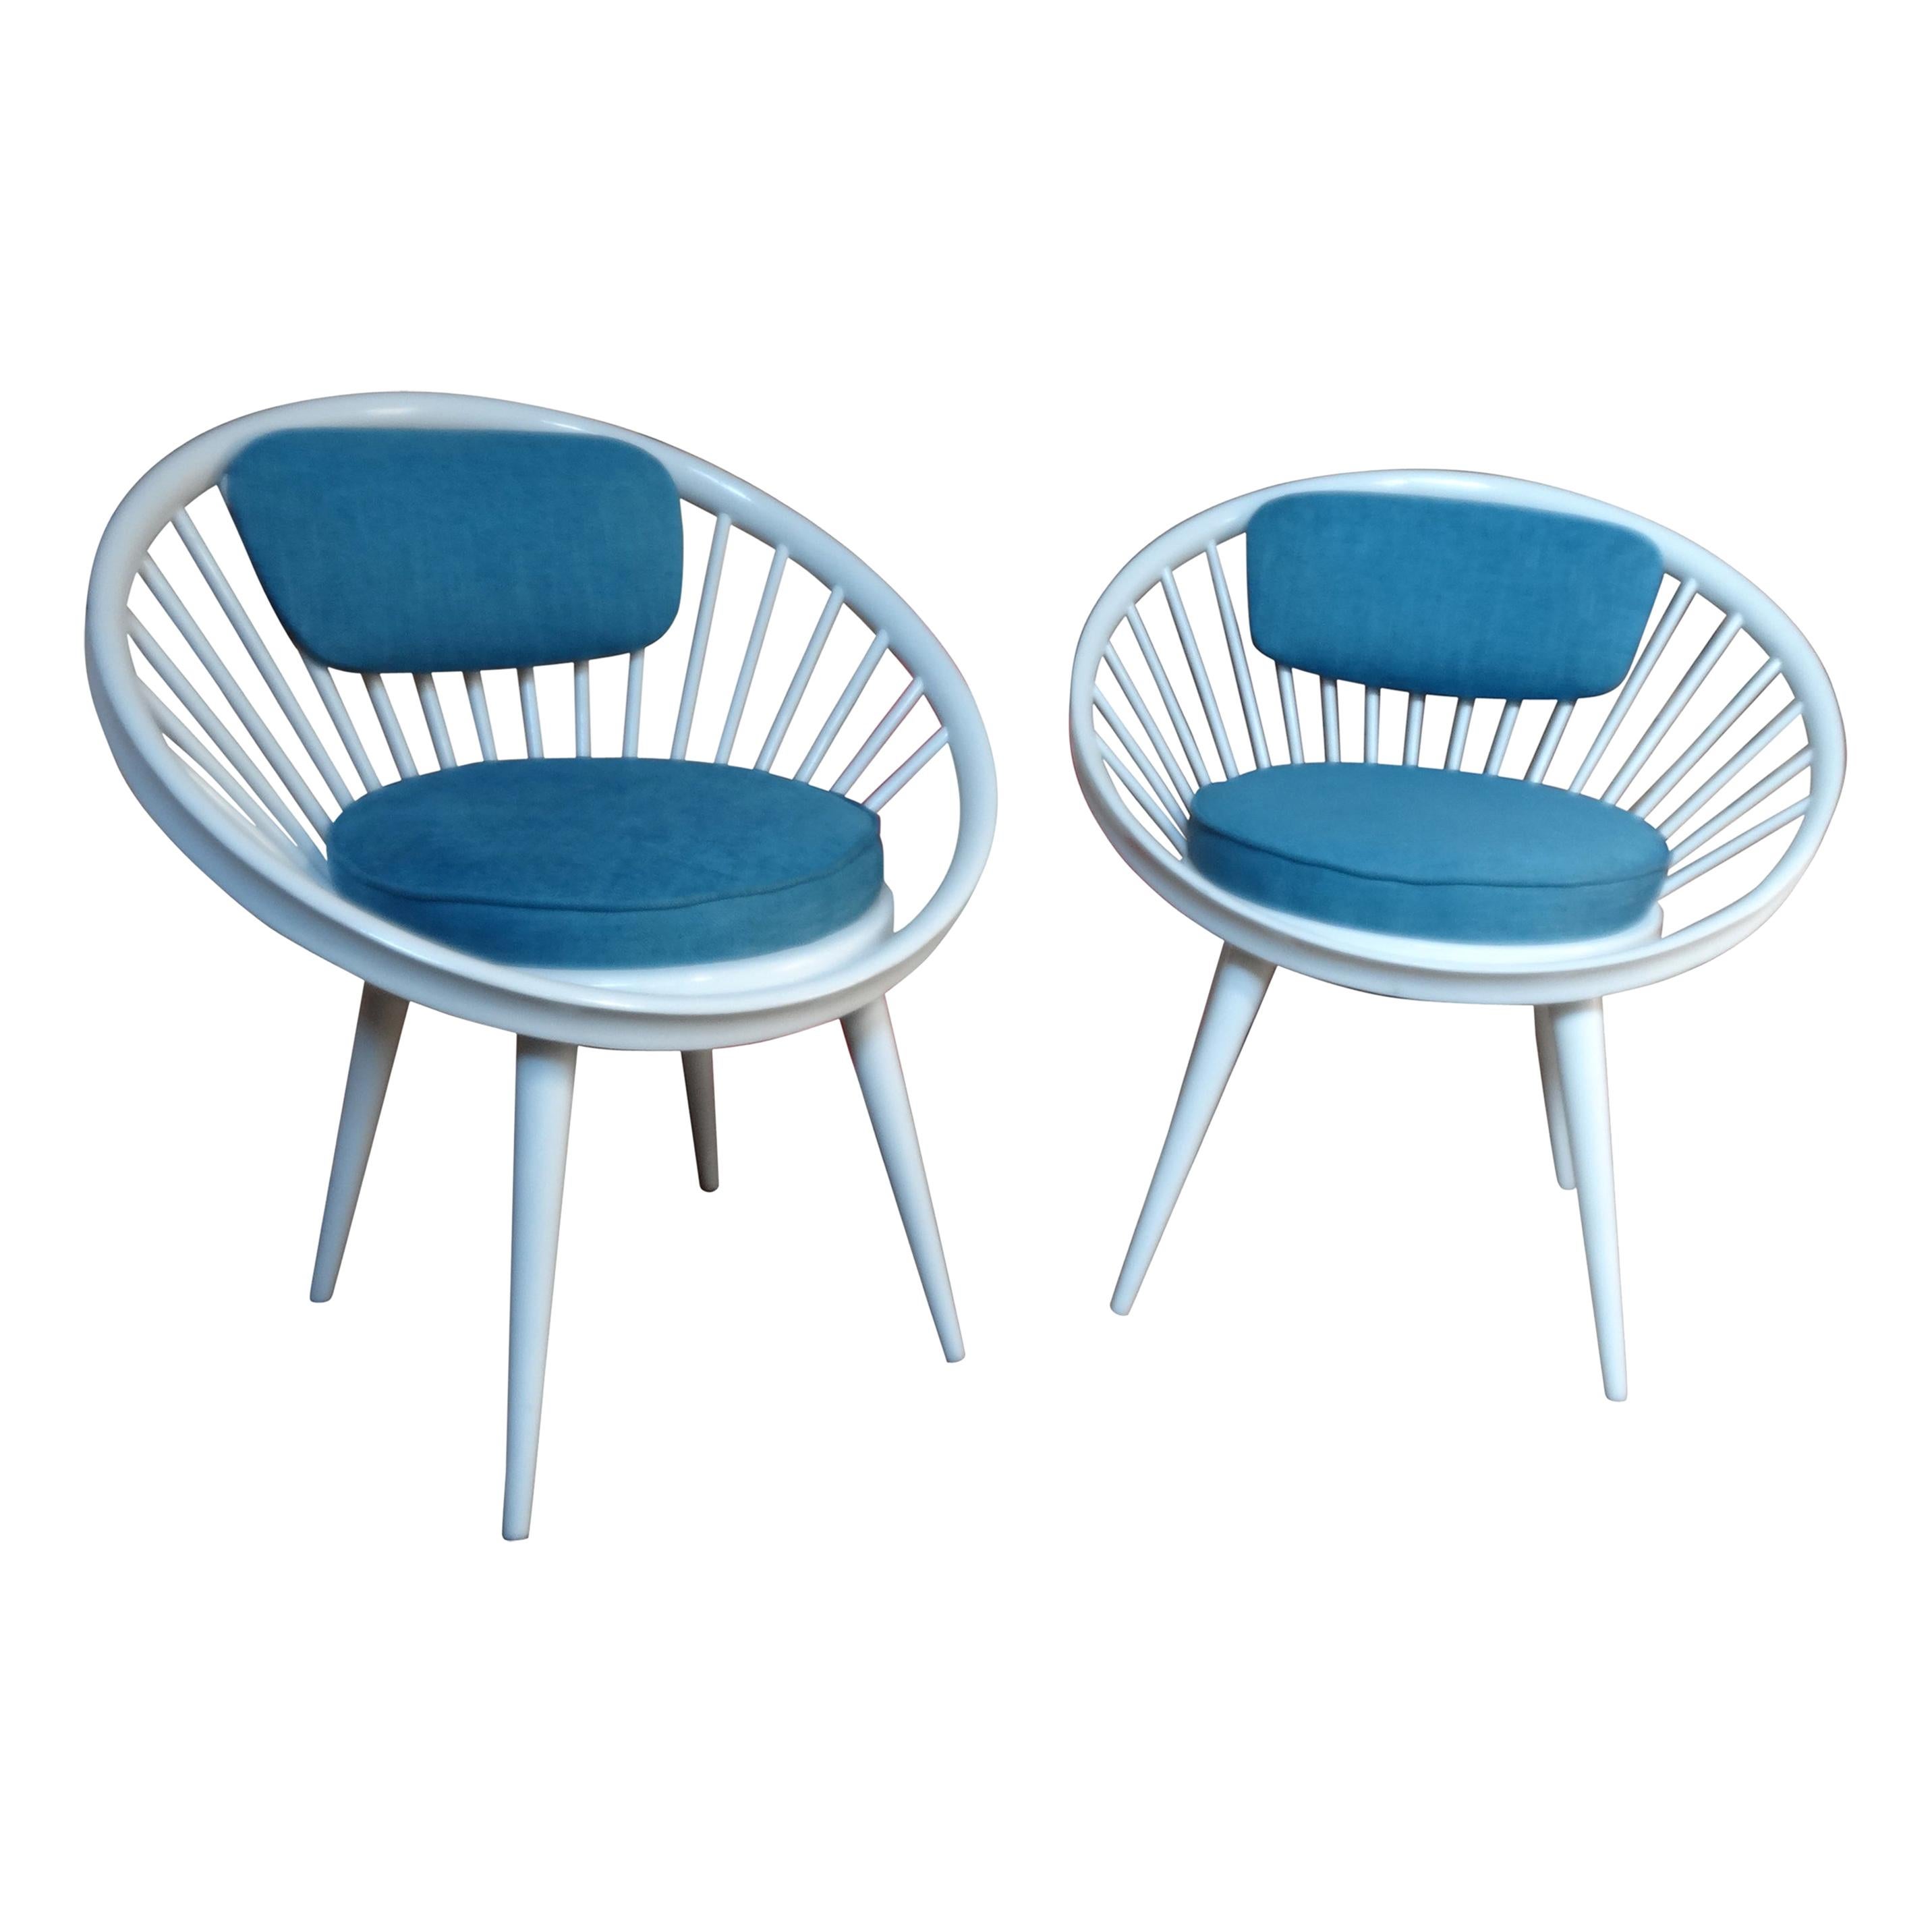 20th Century Yngve Ekström Designed for Swedese Retro 1960s Circle Chairs For Sale